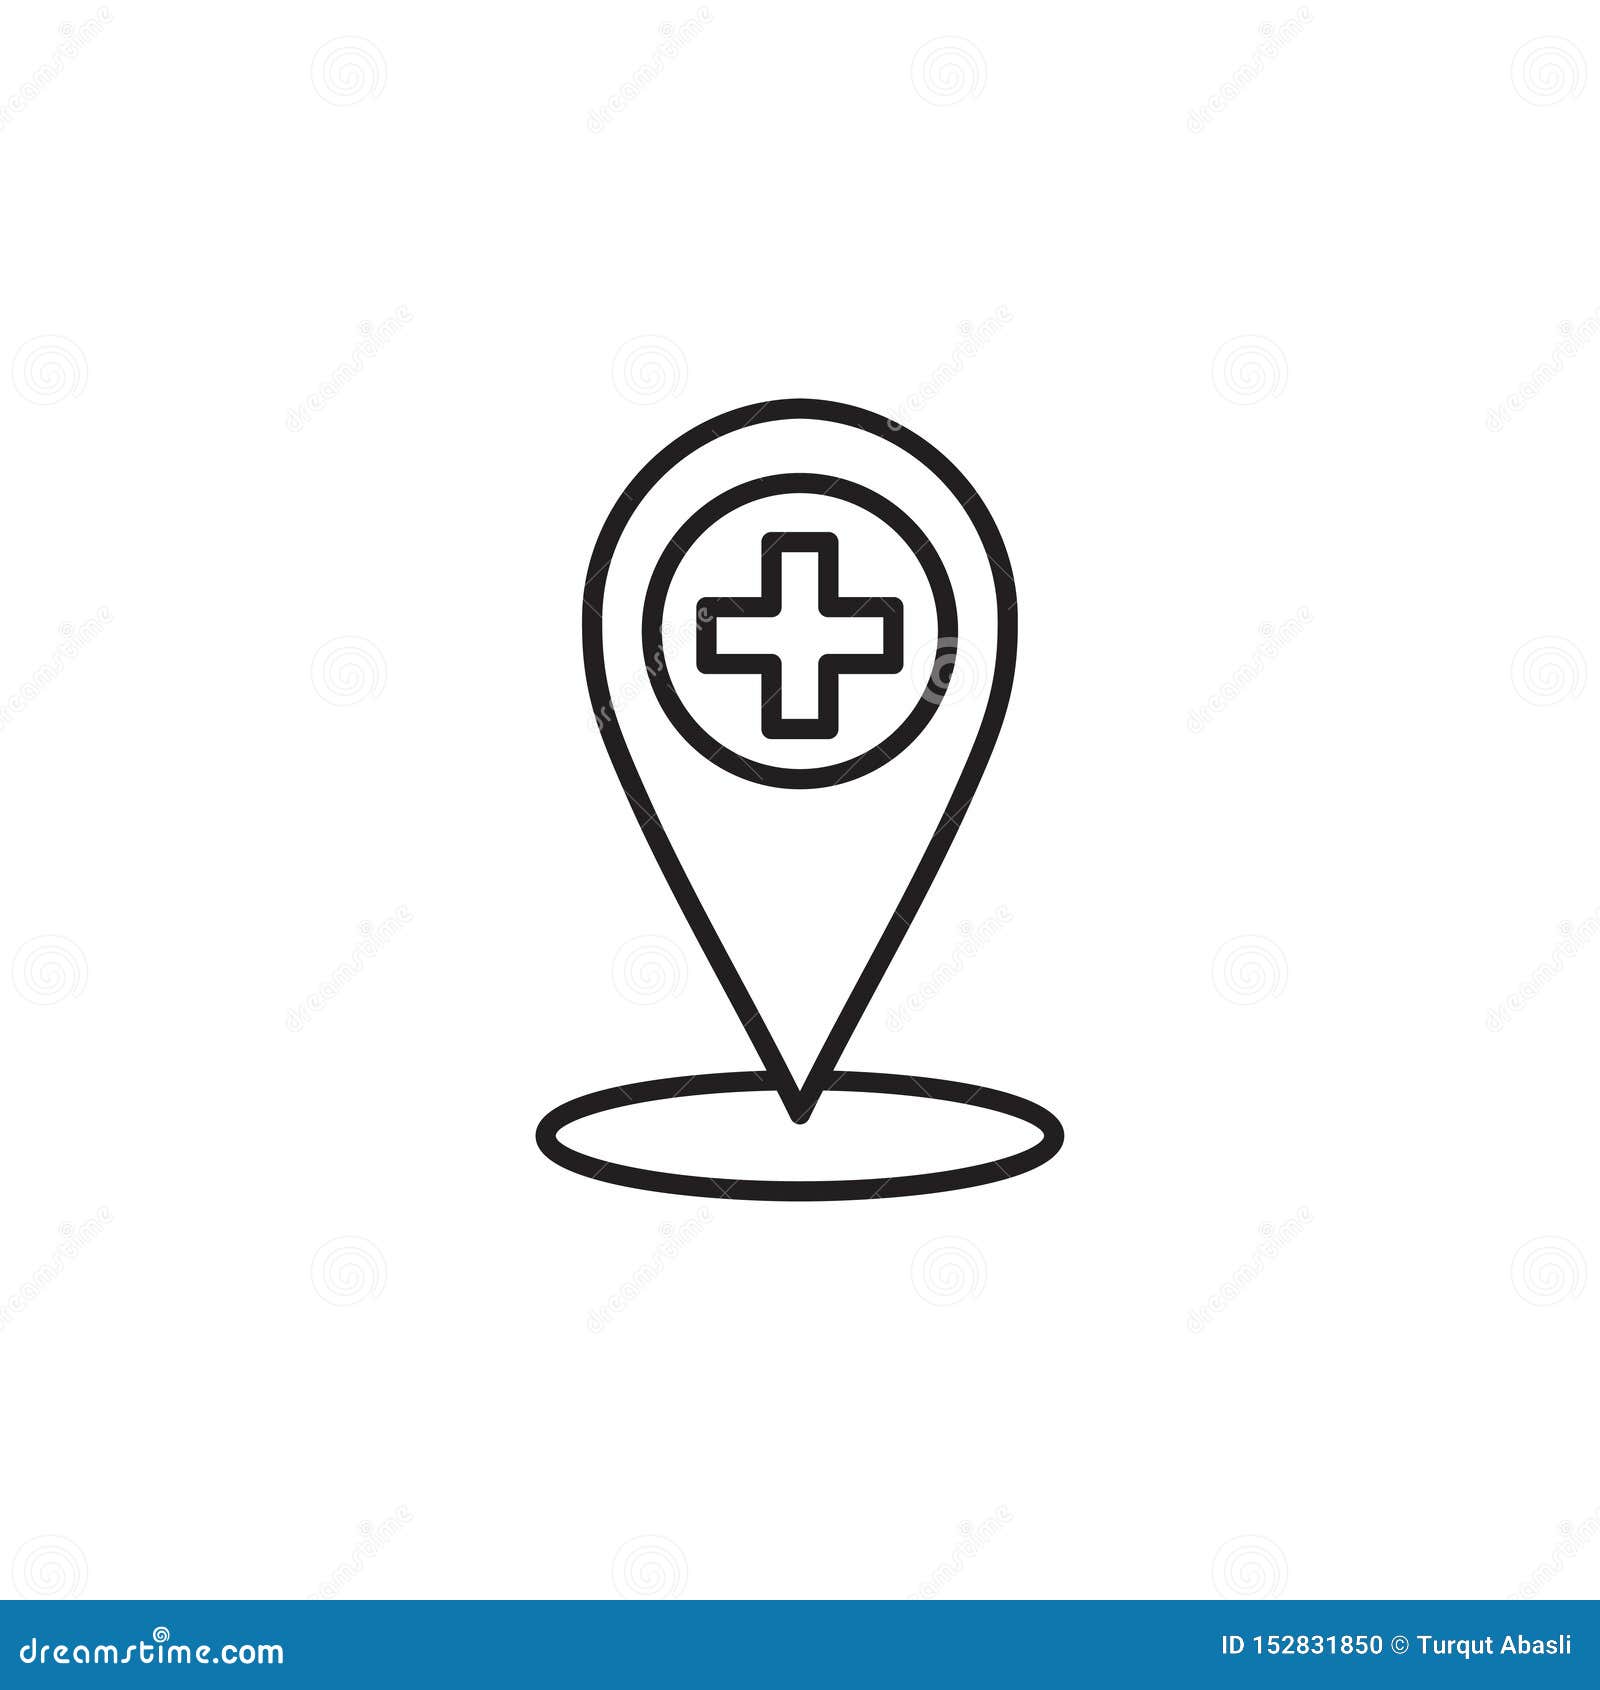 modern medical line icon of geo position. outline clinic logo for polyclinics.